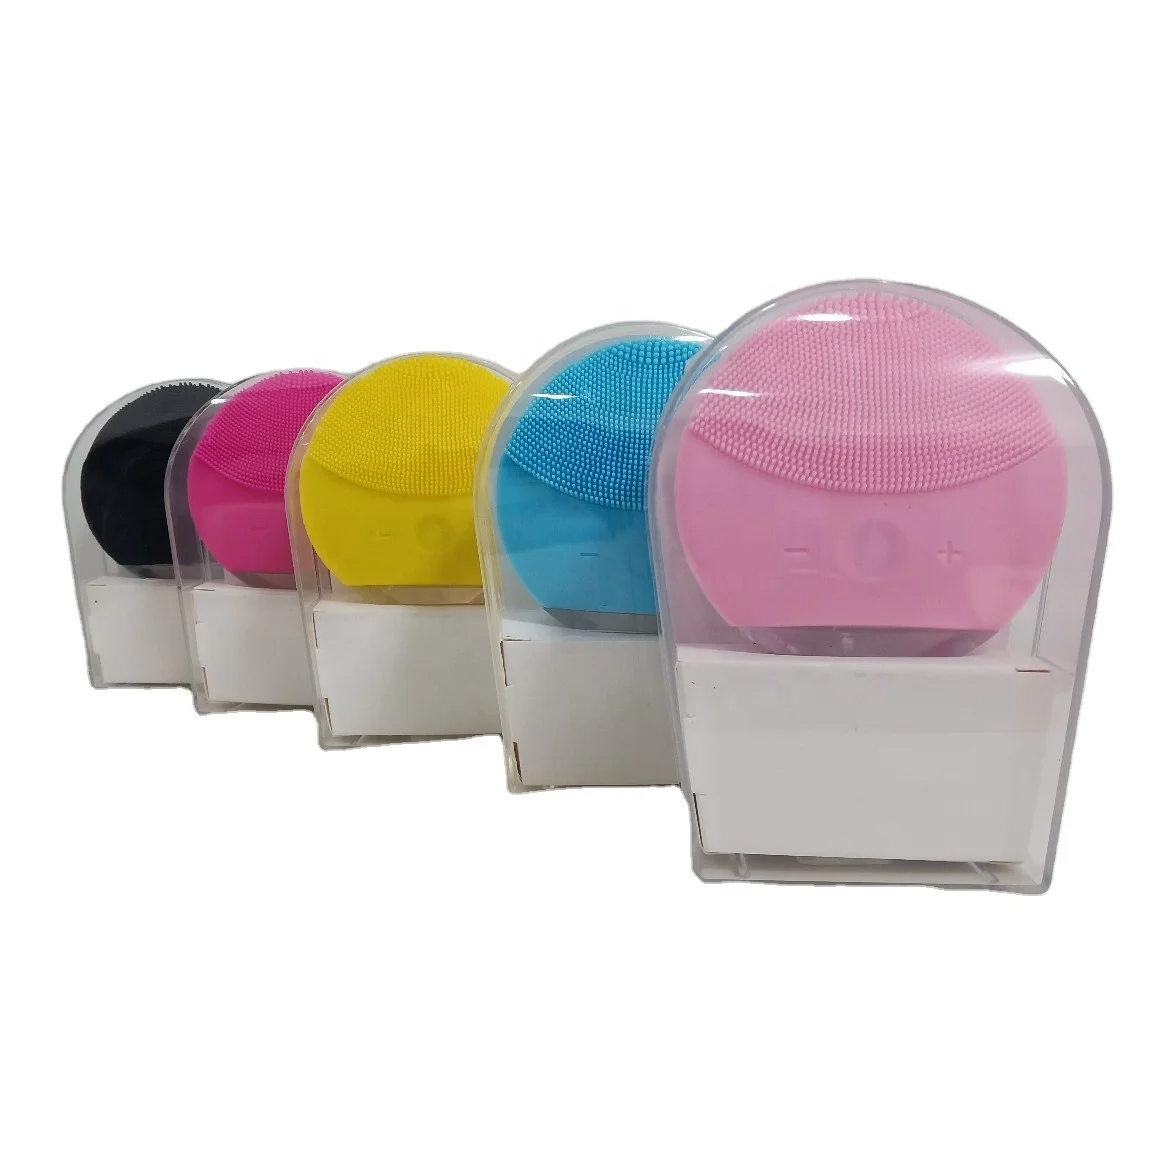 

Hot new China Donnguan factory best selling high quality silicone face cleanser and massager brush, Customized color